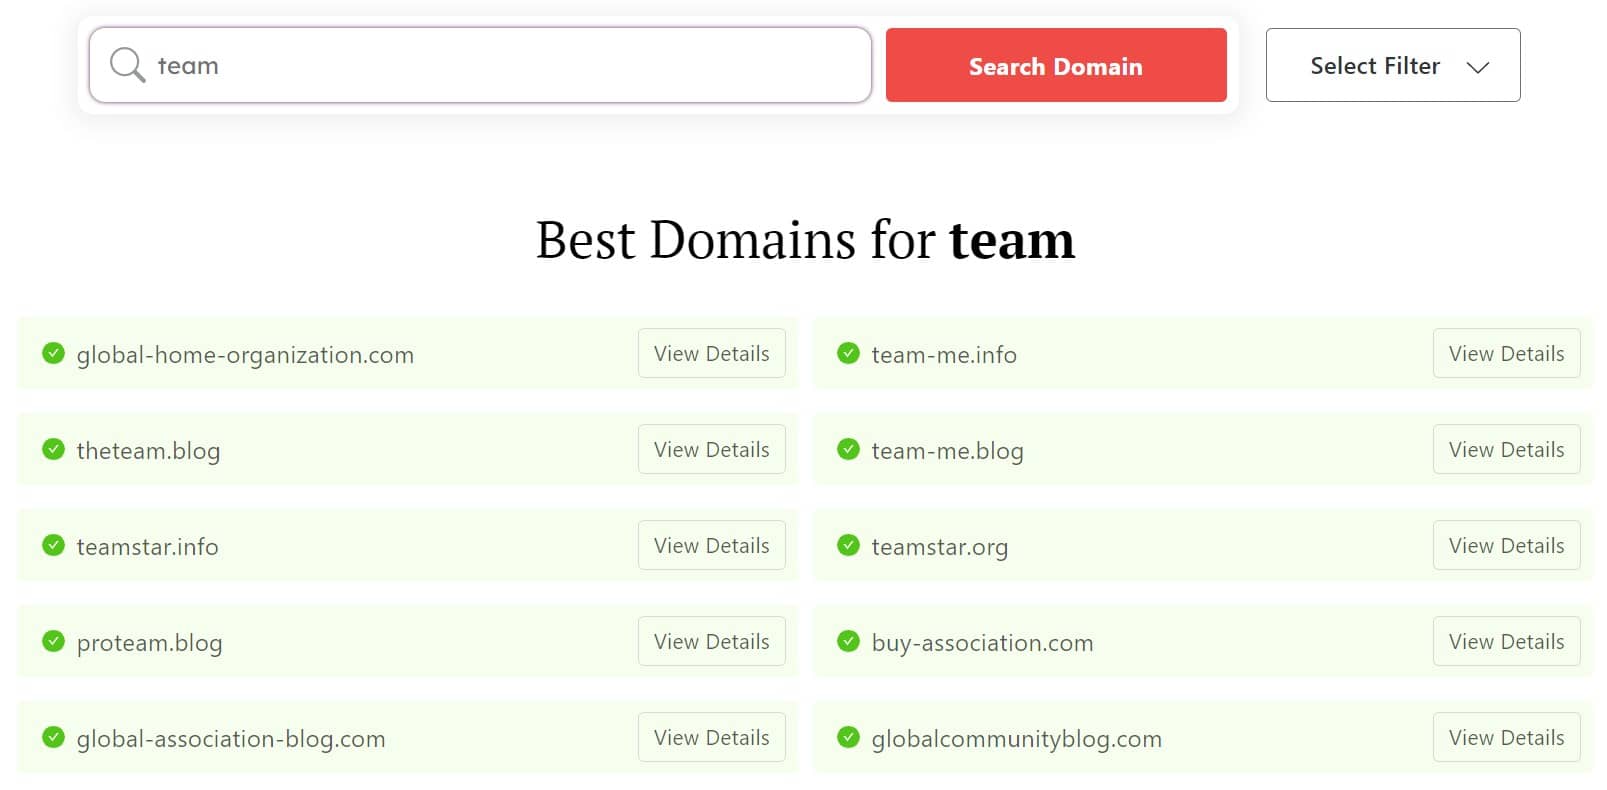 DomainWheel team name generator search results for "team"